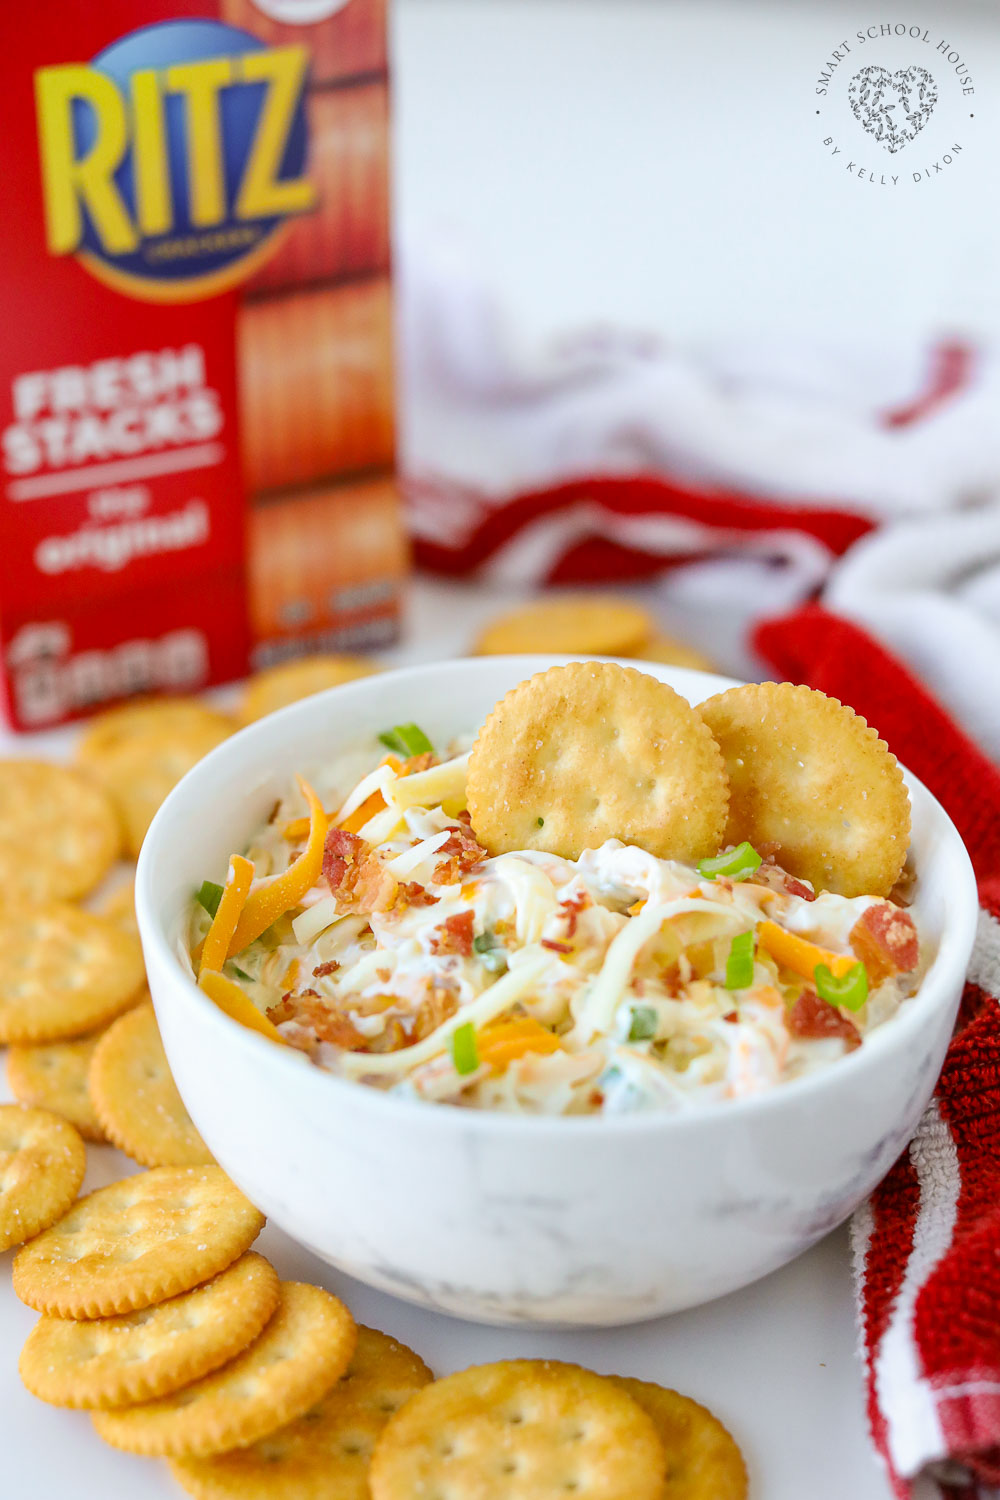 Million Dollar dip is always a hit! A popular recipe whose name says it all! Made with 6 easy-to-find ingredients and Ritz Crackers for dipping.